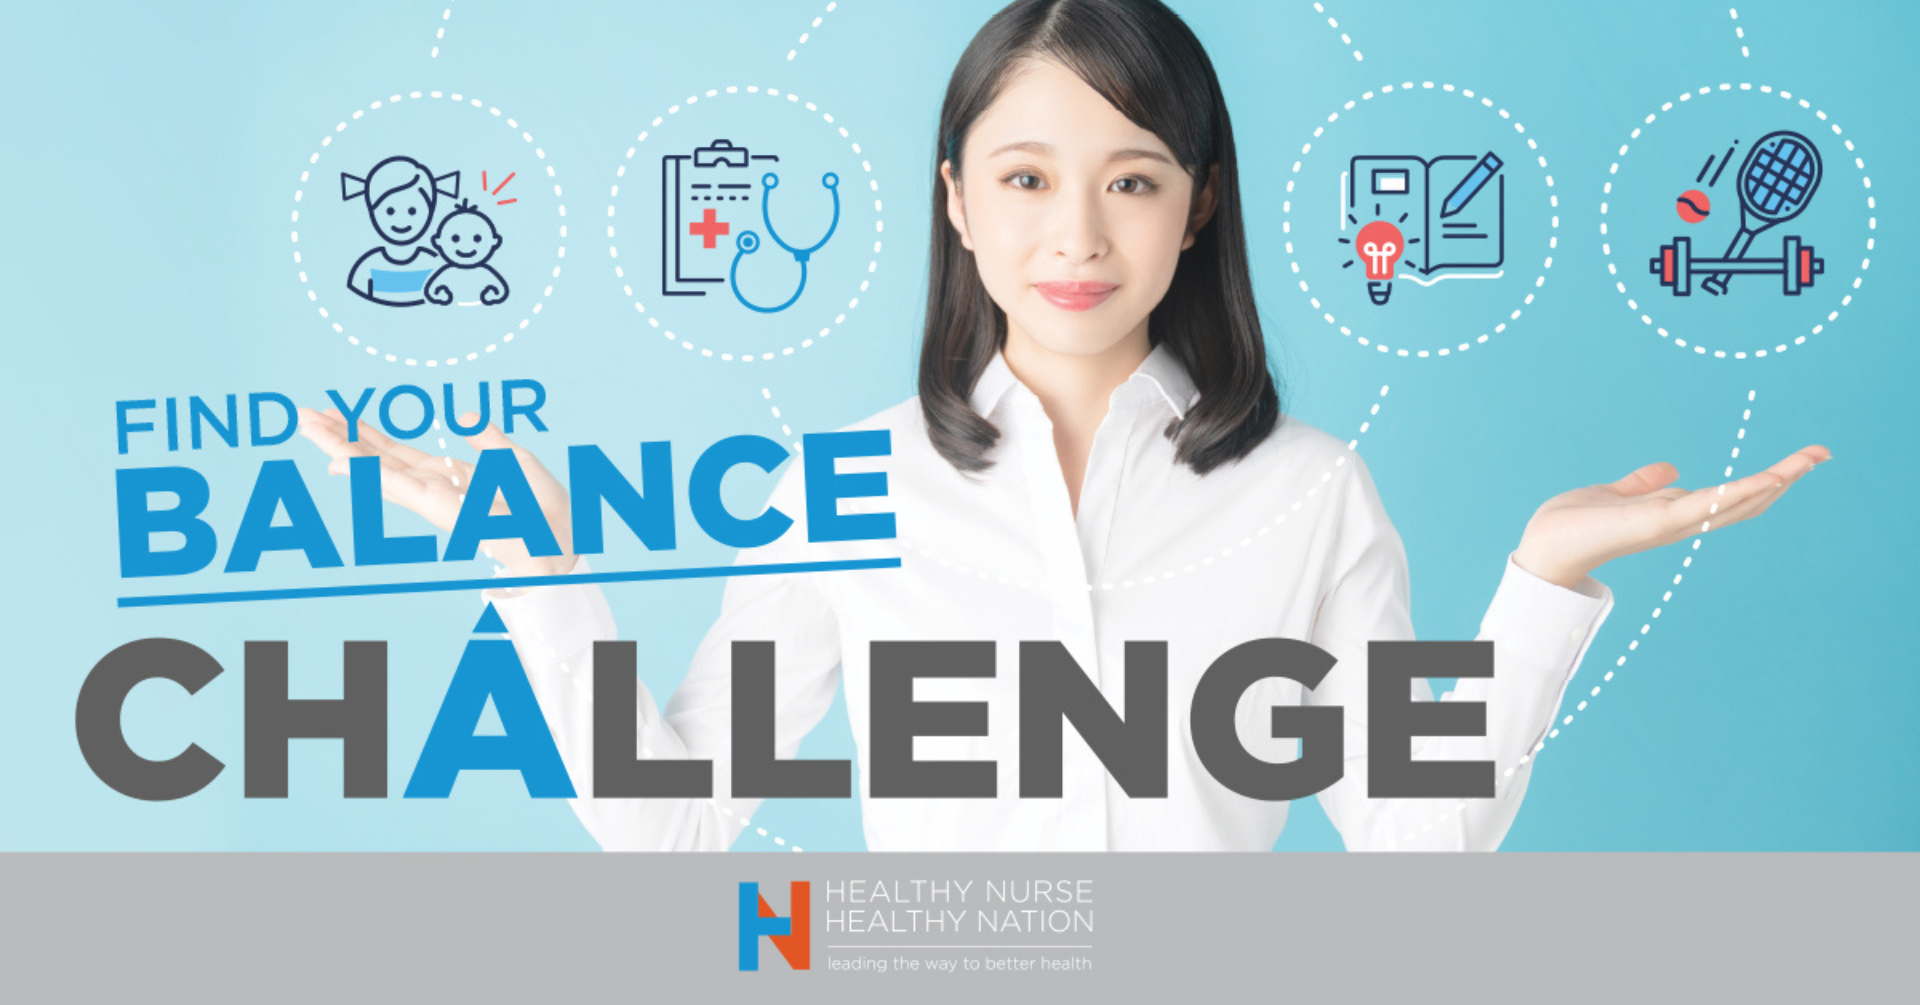 Ask for Help - Healthy Nurse, Healthy Nation - Find Your Balance challenge - Day 7 4647